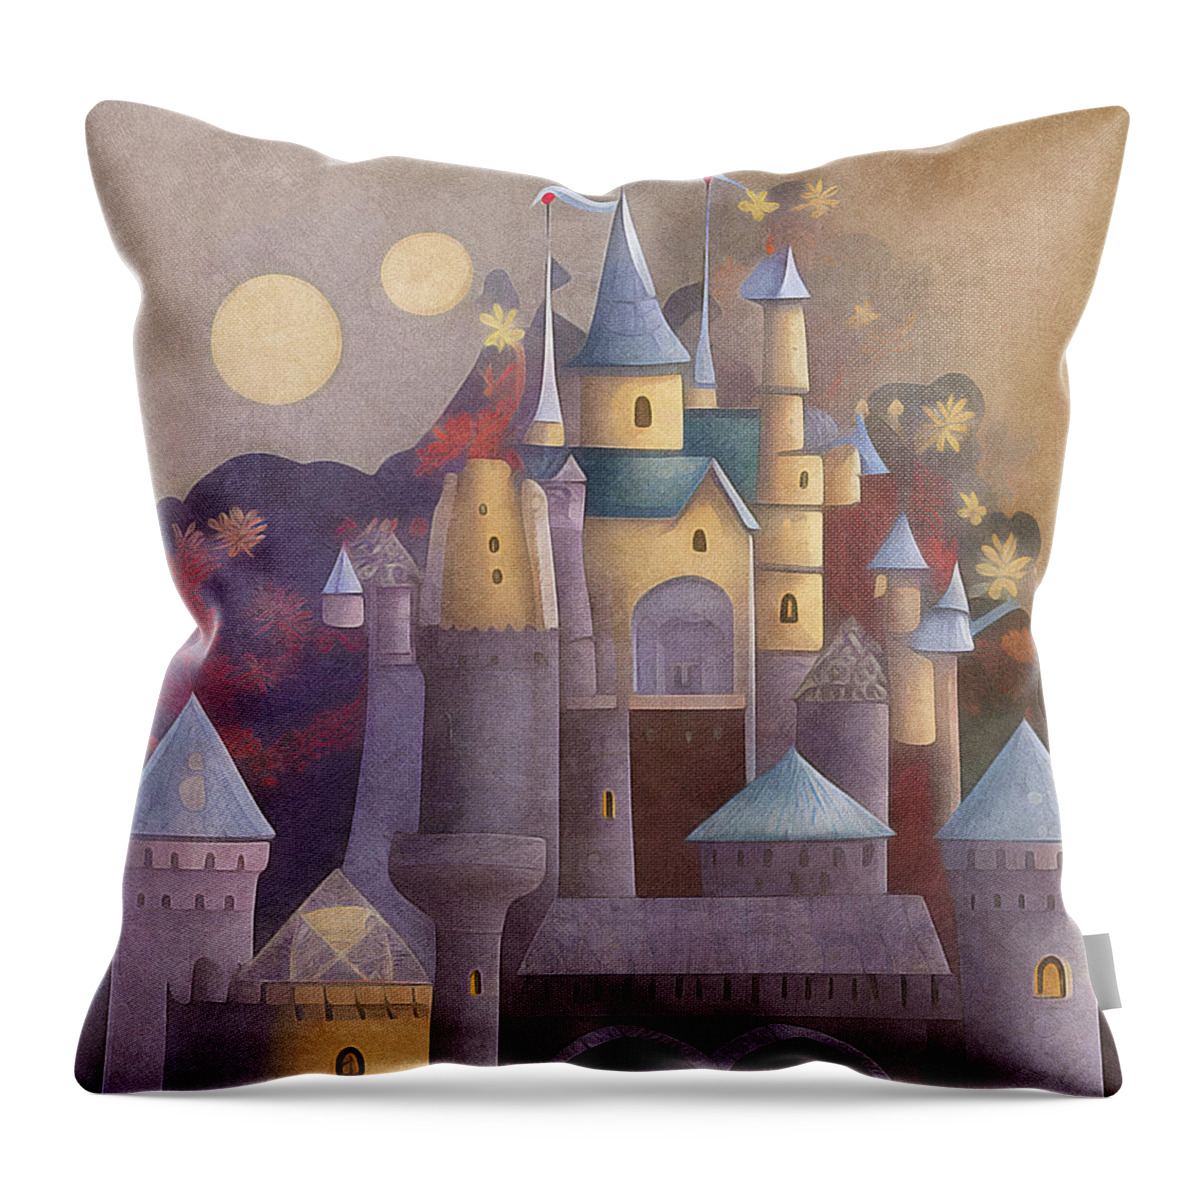 Castle Throw Pillow featuring the digital art Castle #1 by Mark Greenberg